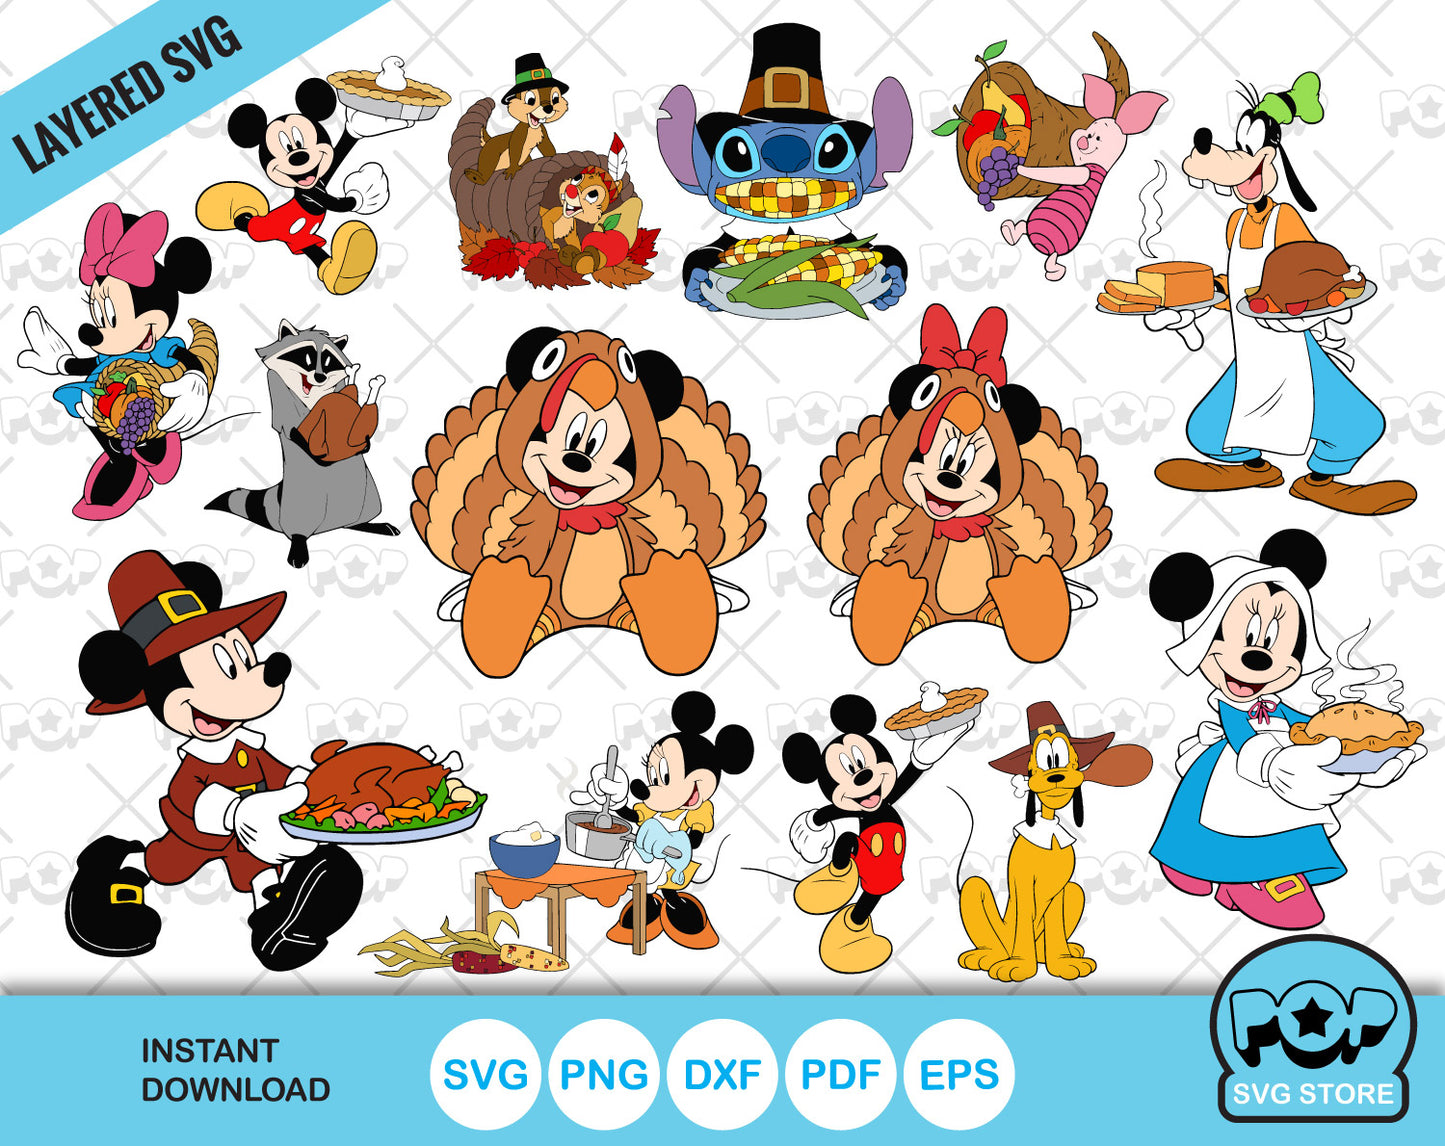 Disney Thanksgiving clipart bundle, Mickey Mouse Thanksgiving SVG cut files for Cricut / Silhouette, PNG, DXF, instant download